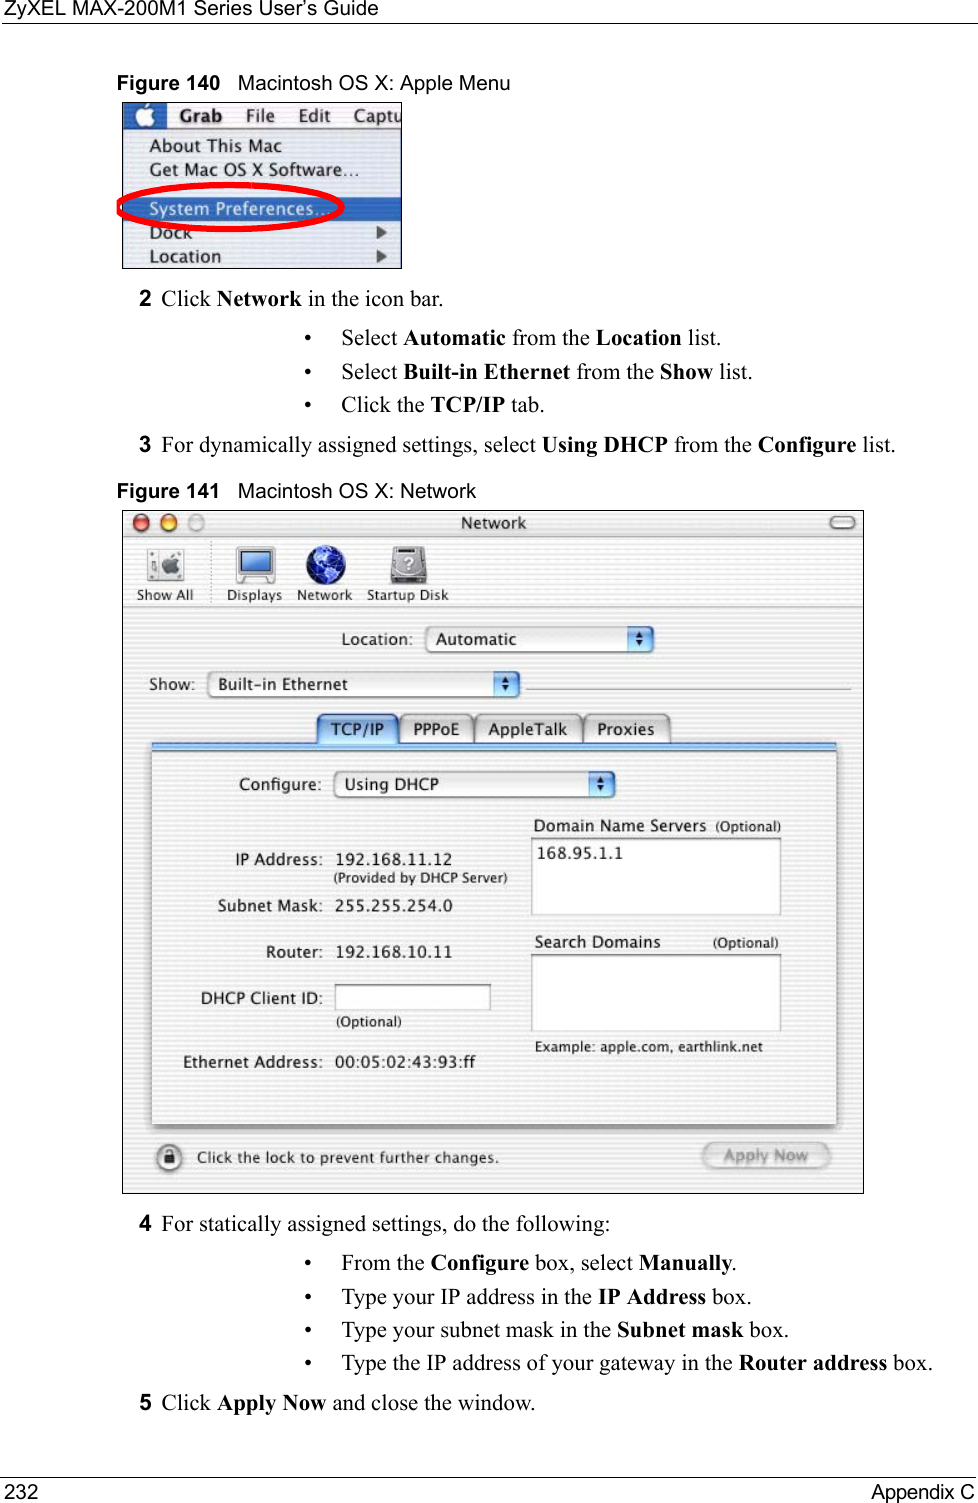 ZyXEL MAX-200M1 Series User’s Guide232 Appendix CFigure 140   Macintosh OS X: Apple Menu2Click Network in the icon bar.   • Select Automatic from the Location list.• Select Built-in Ethernet from the Show list. • Click the TCP/IP tab.3For dynamically assigned settings, select Using DHCP from the Configure list.Figure 141   Macintosh OS X: Network4For statically assigned settings, do the following:•From the Configure box, select Manually.• Type your IP address in the IP Address box.• Type your subnet mask in the Subnet mask box.• Type the IP address of your gateway in the Router address box.5Click Apply Now and close the window.